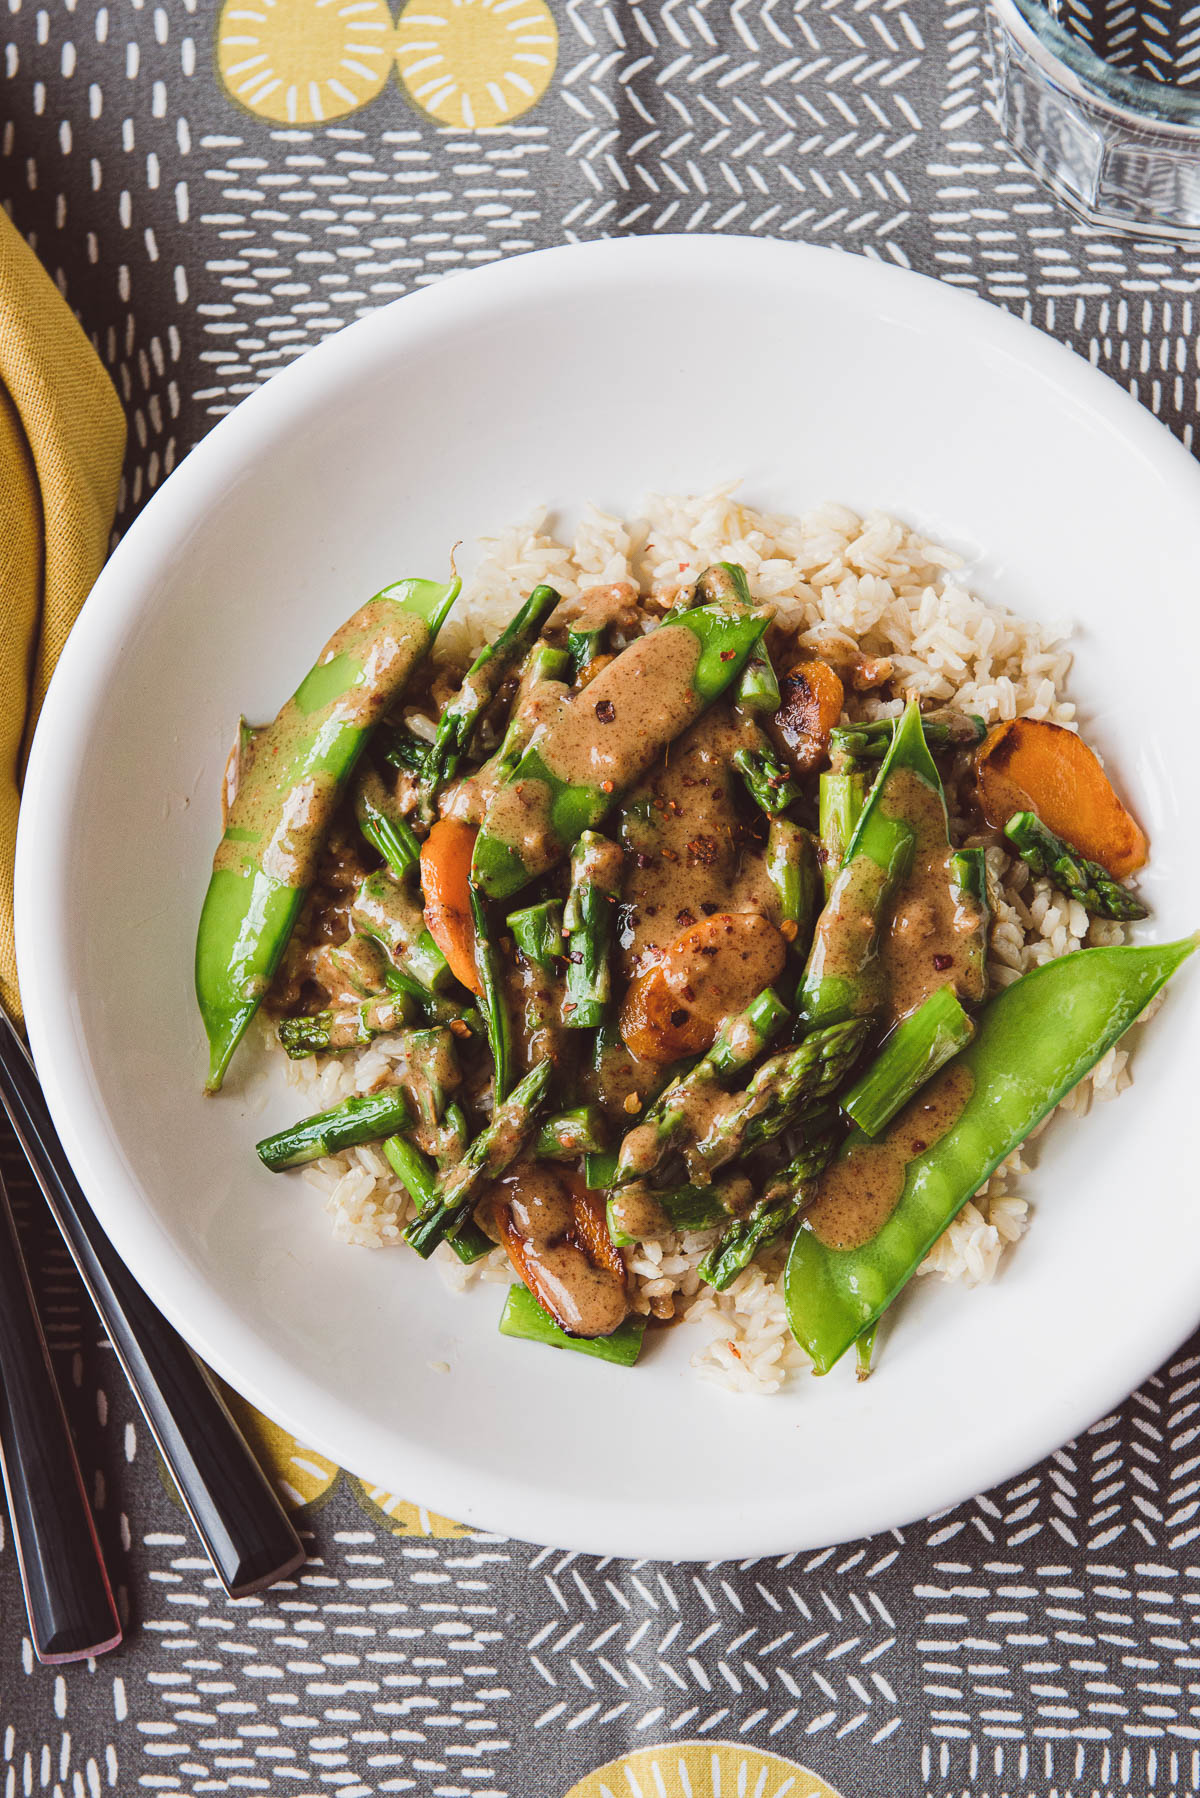 asparagus stir-fry on a bed of brown rice.